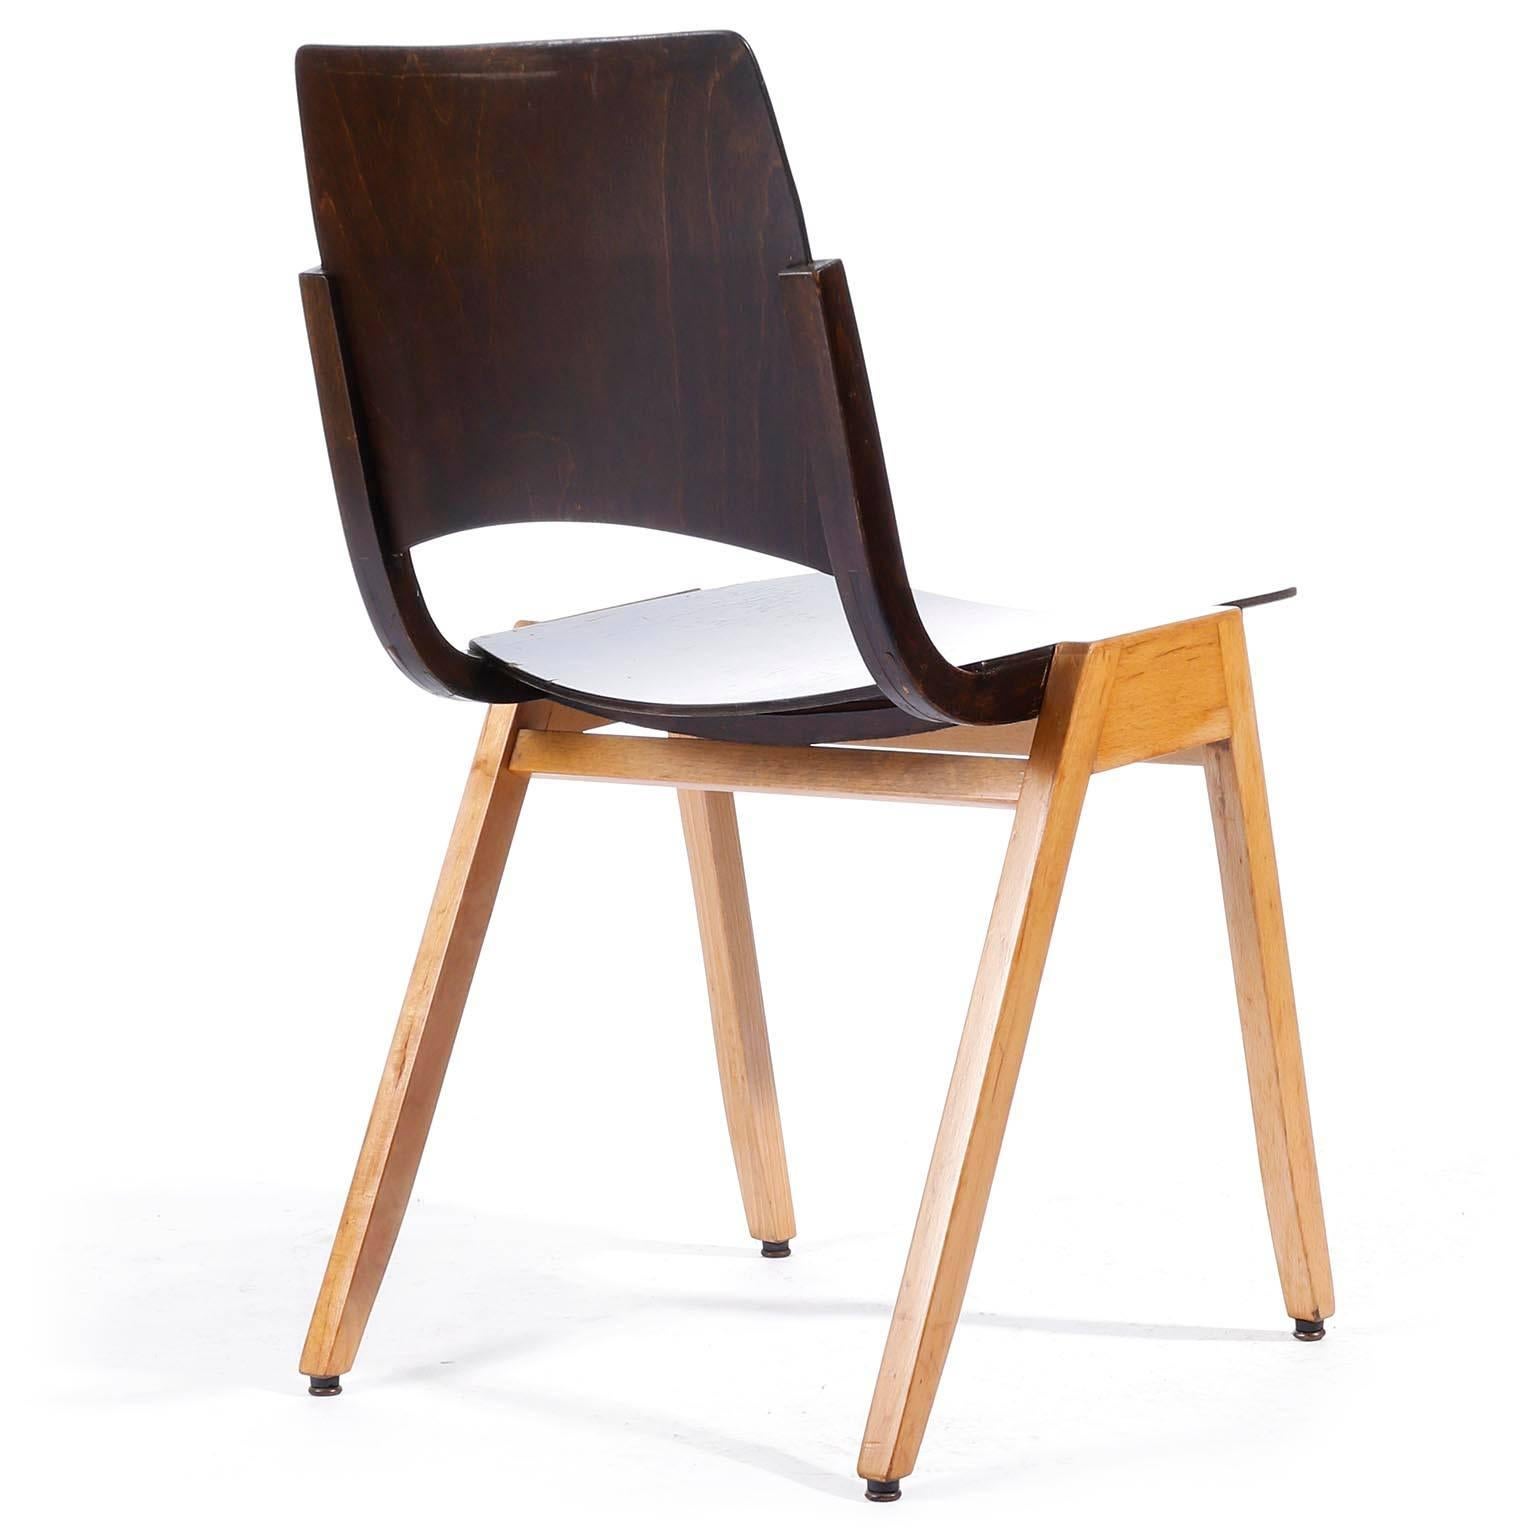 Bentwood Roland Rainer, Set of Eight Stacking Chairs P7, Bicolored Beech, Austria, 1952 For Sale